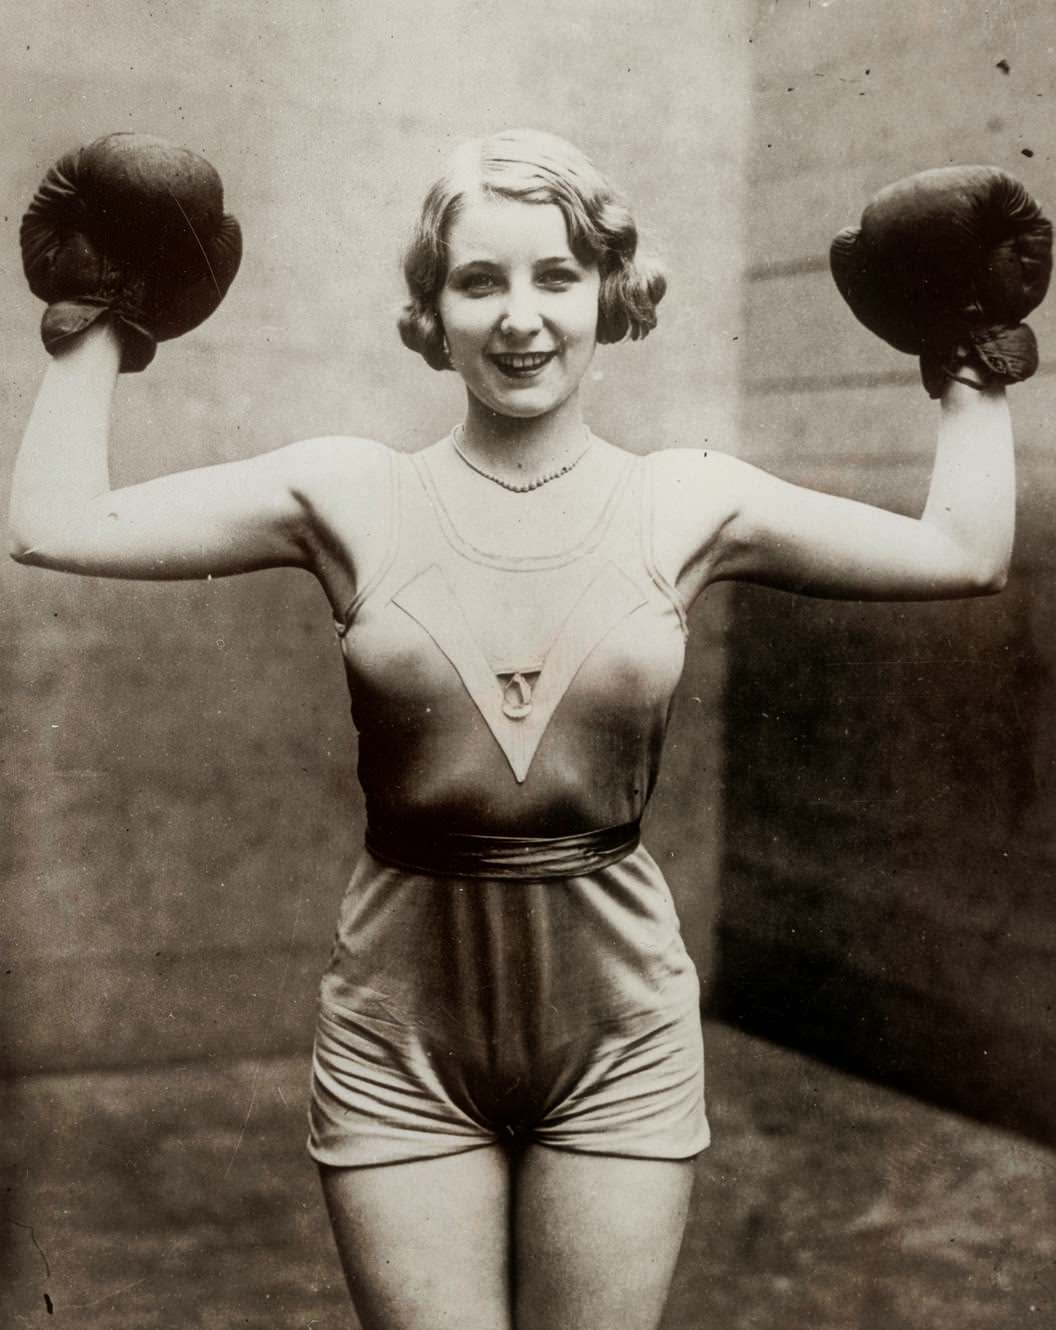 Irish women's boxing champion Elsie Connor showing off for a magazine in preparation for a fight in 1931.